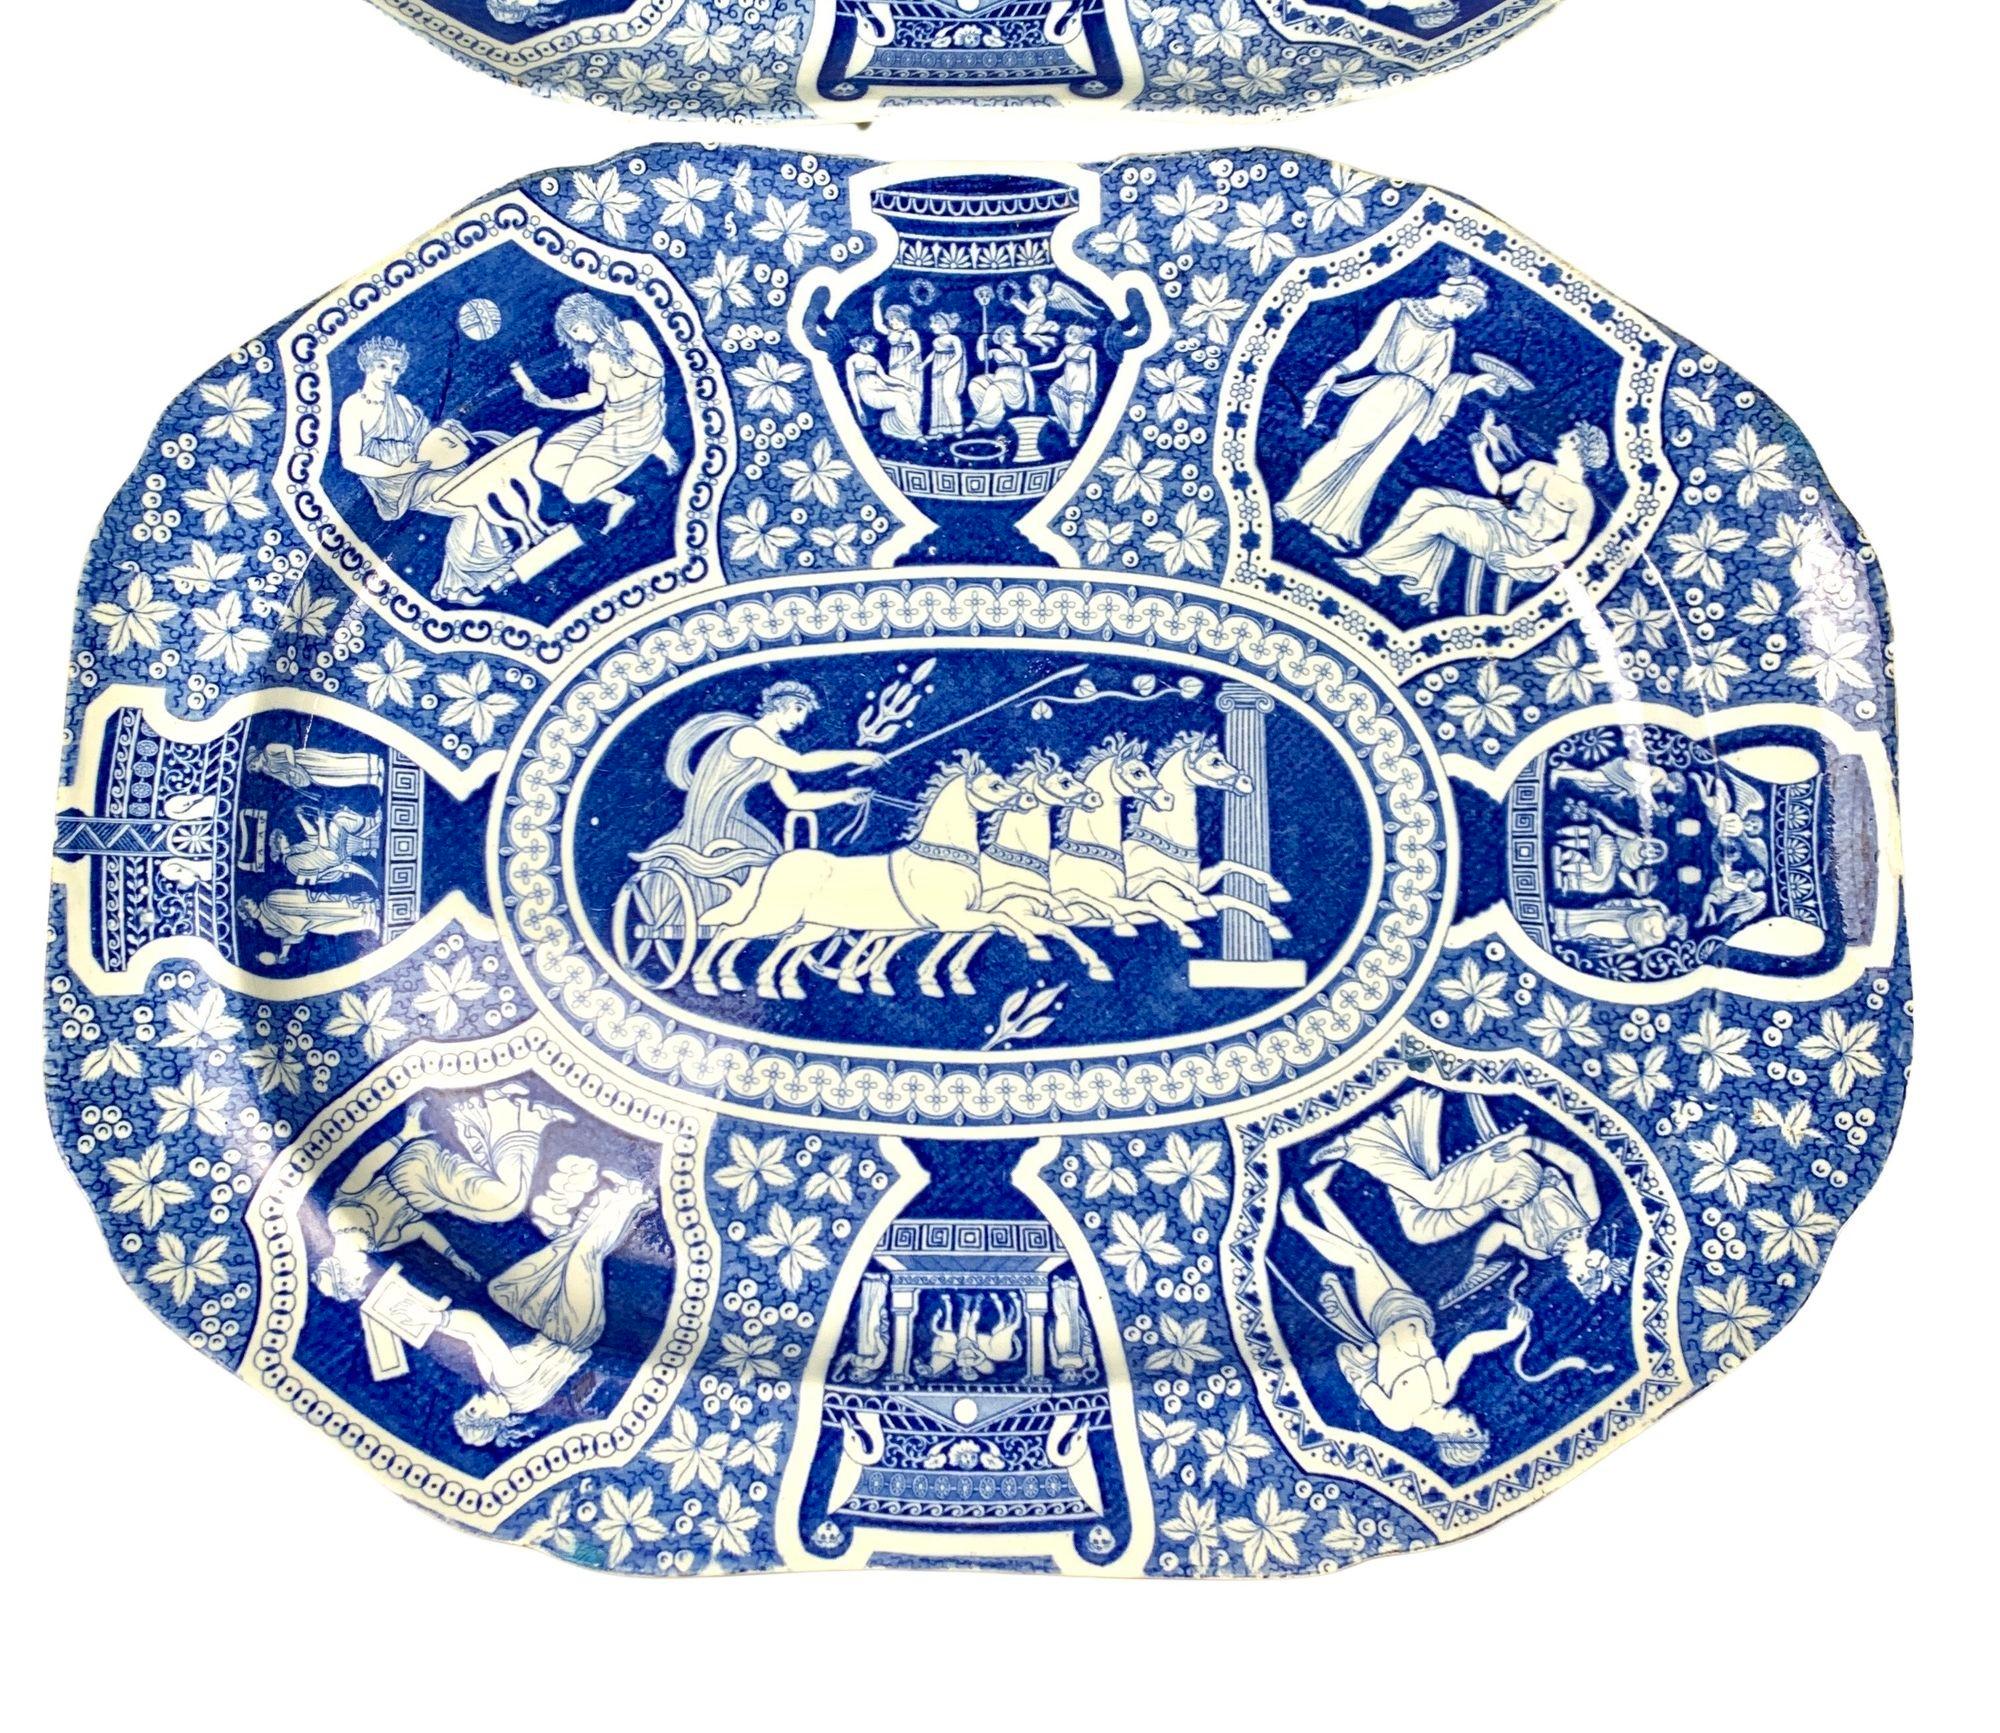 Spode made these fabulous Greekware platters circa 1810.
They are decorated in the neoclassical 